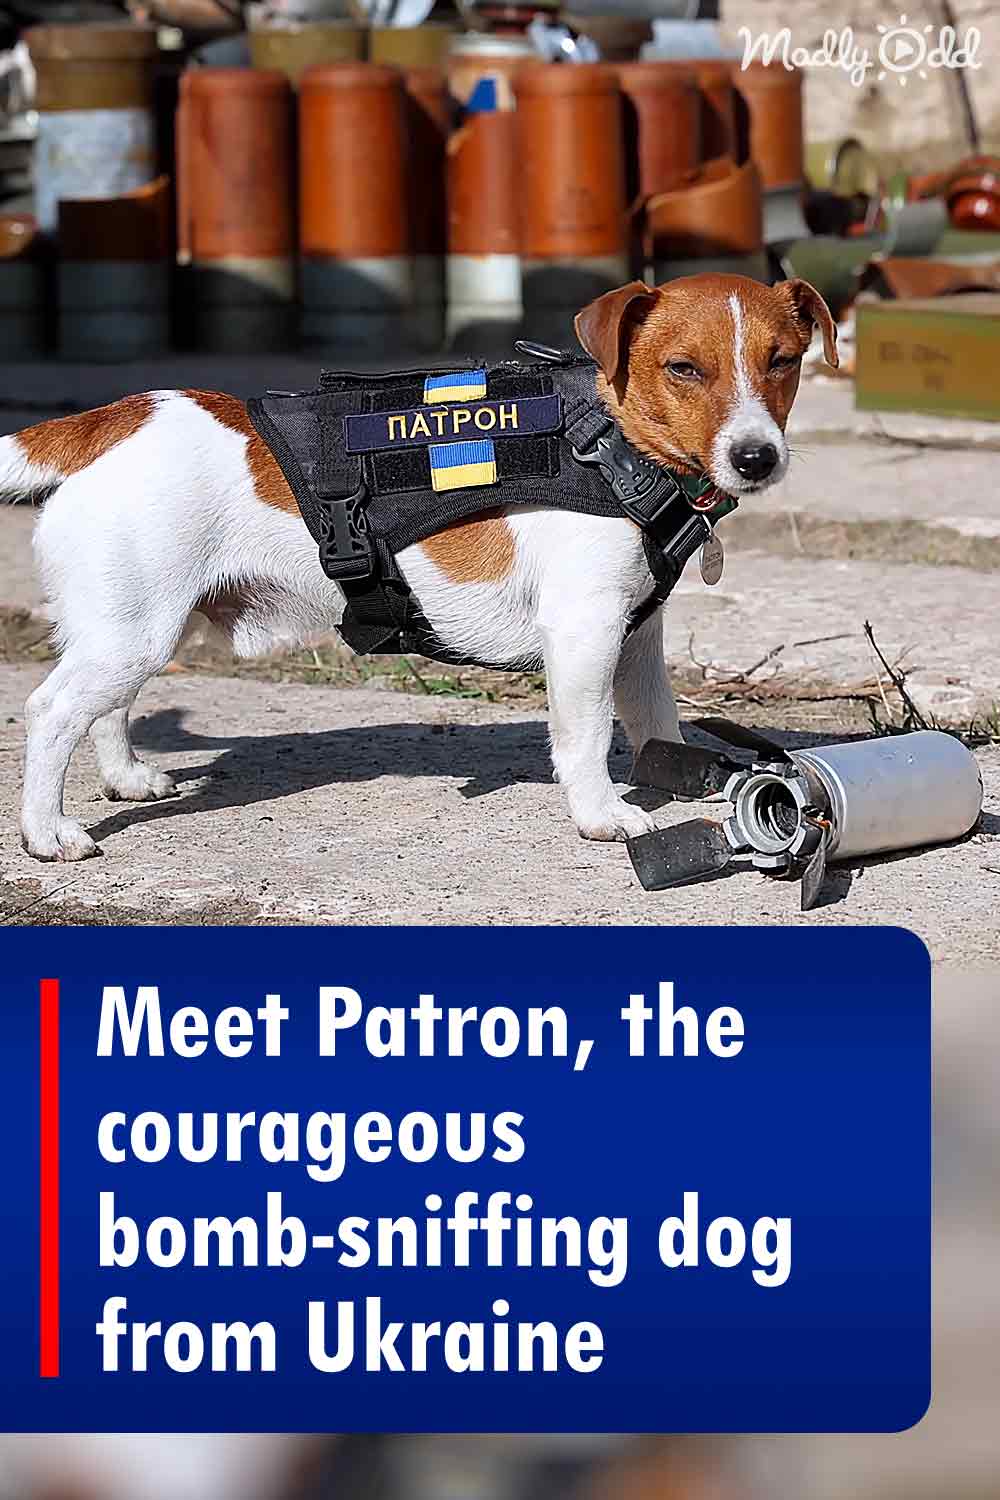 Meet Patron, the courageous bomb-sniffing dog from Ukraine